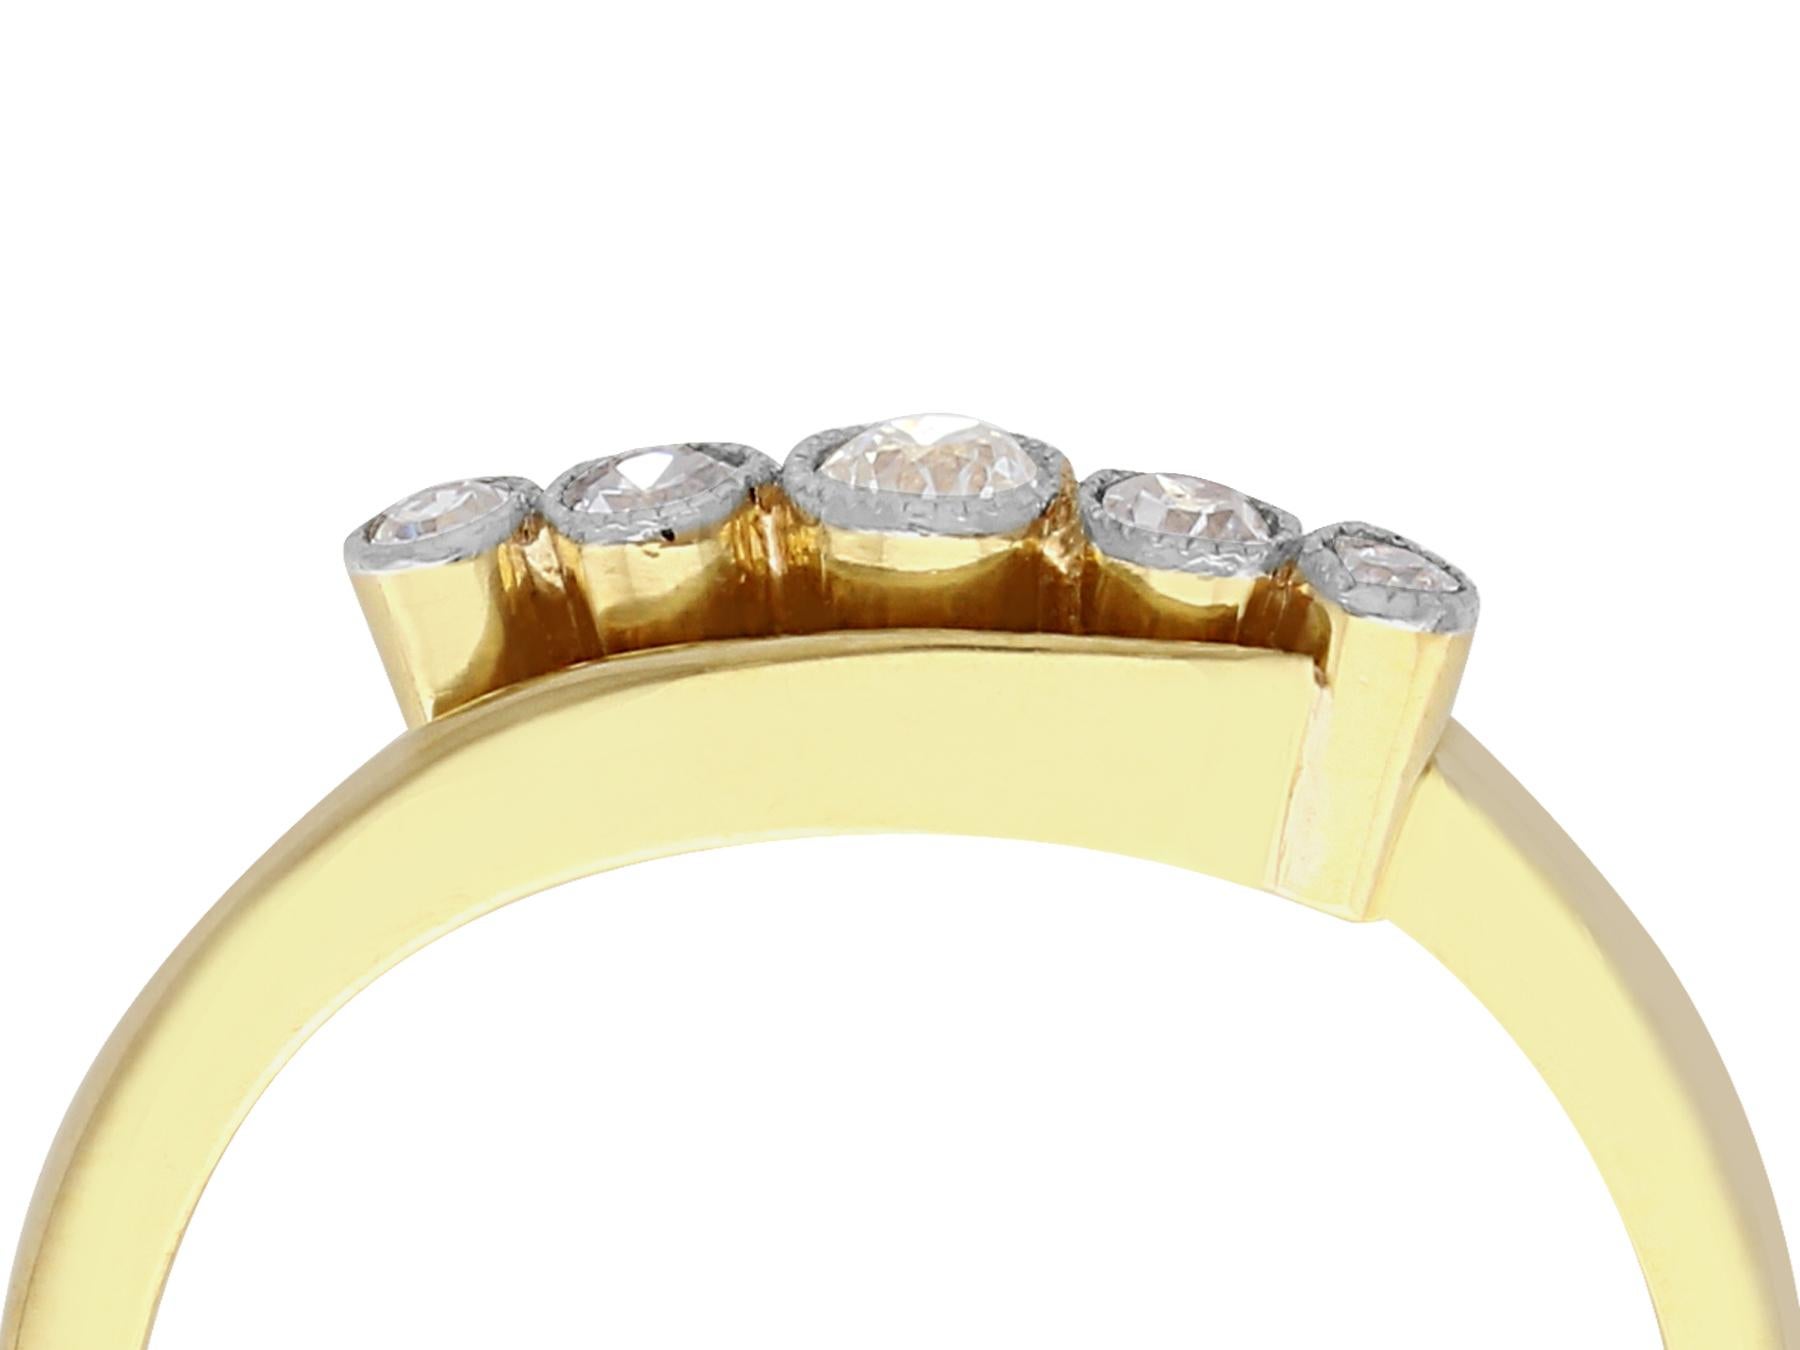 A very good antique 0.22 carat diamond and 18 karat yellow gold, platinum set five stone ring; part of our antique jewelry and estate jewelry collections.

This very good 1920s ring has been crafted in 18k yellow gold with a platinum setting.

The